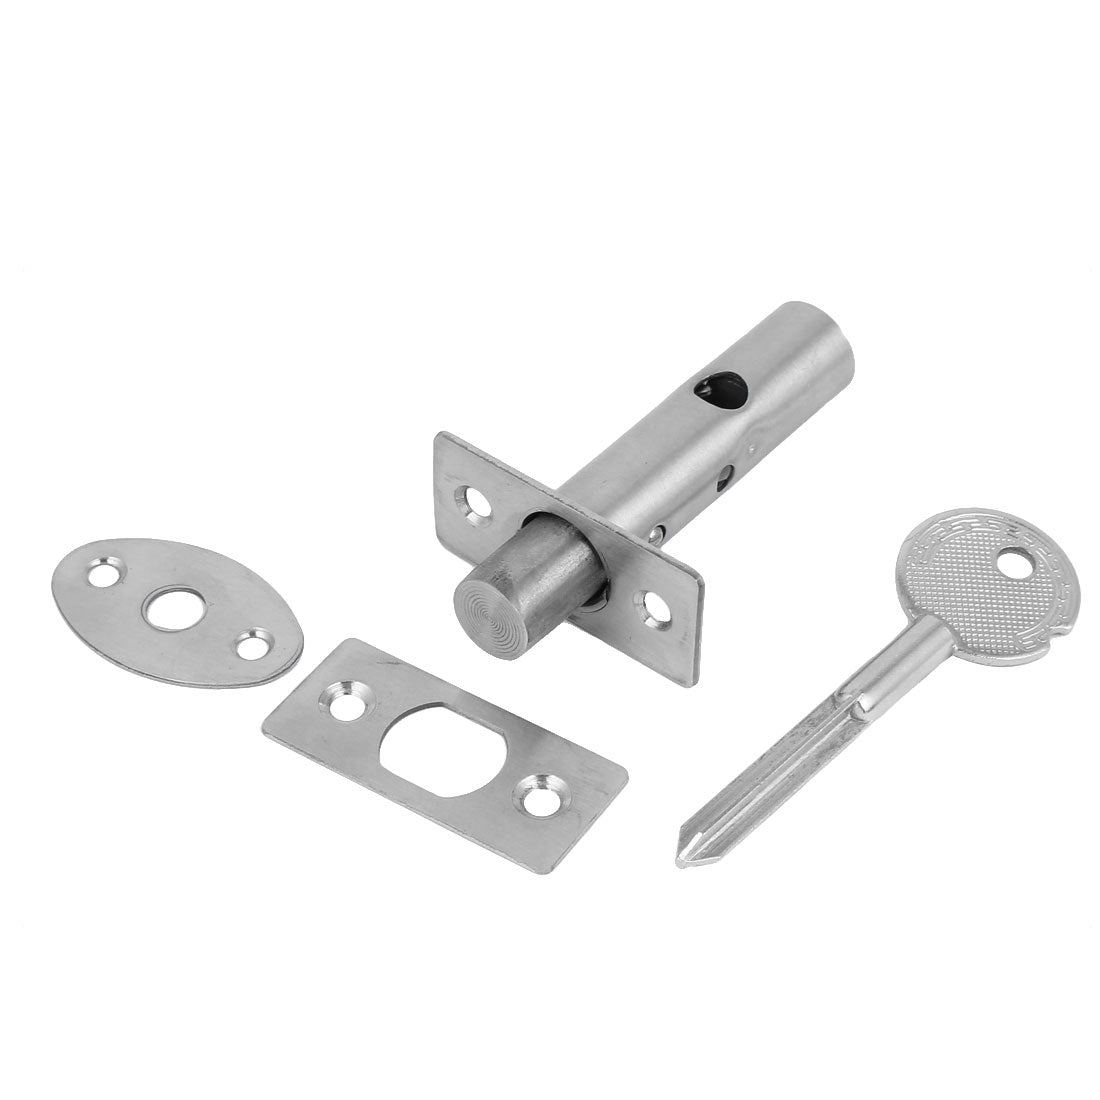 uxcell Uxcell Office Door Stainless Steel Hidden Manager Tubewell Key Mortise Lock Silver Tone